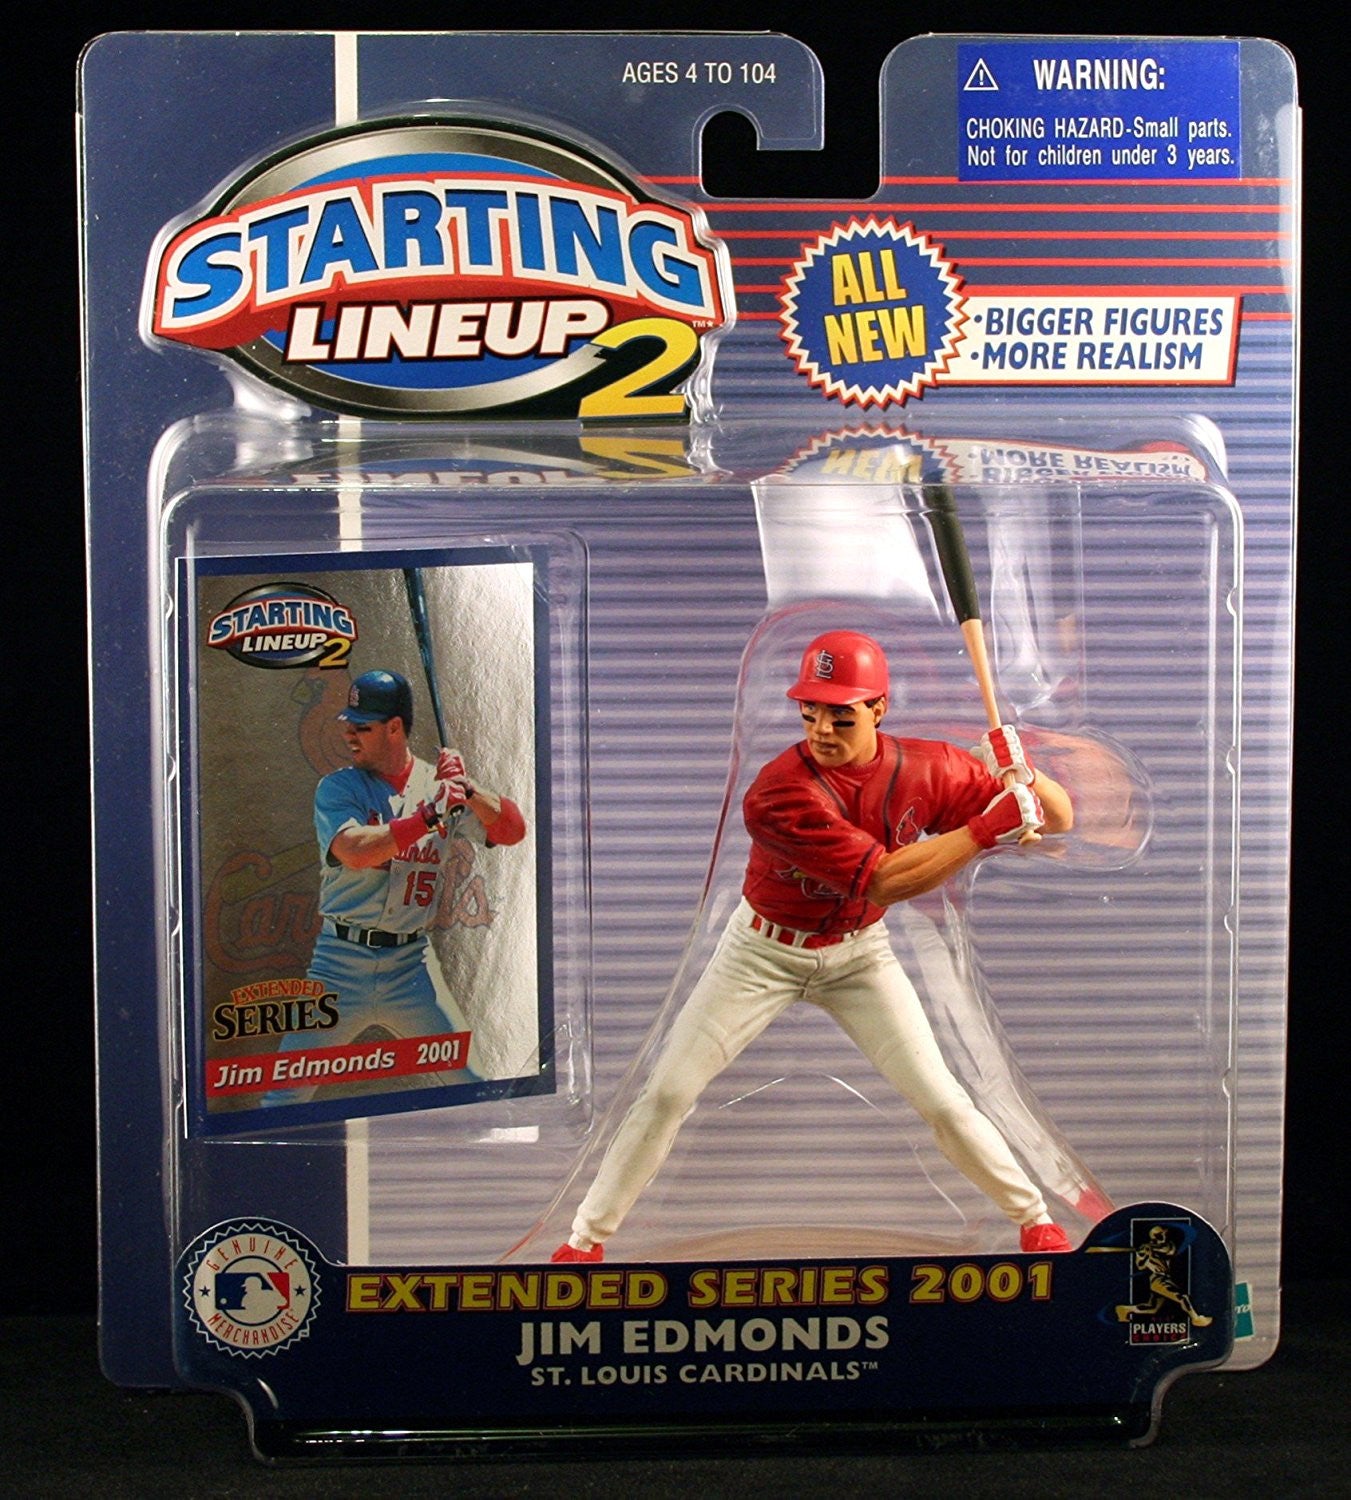 JIM EDMONDS / ST. LOUIS CARDINALS 2001 MLB Starting Lineup 2 EXTENDED SERIES Action Figure & Exclusive Trading Card